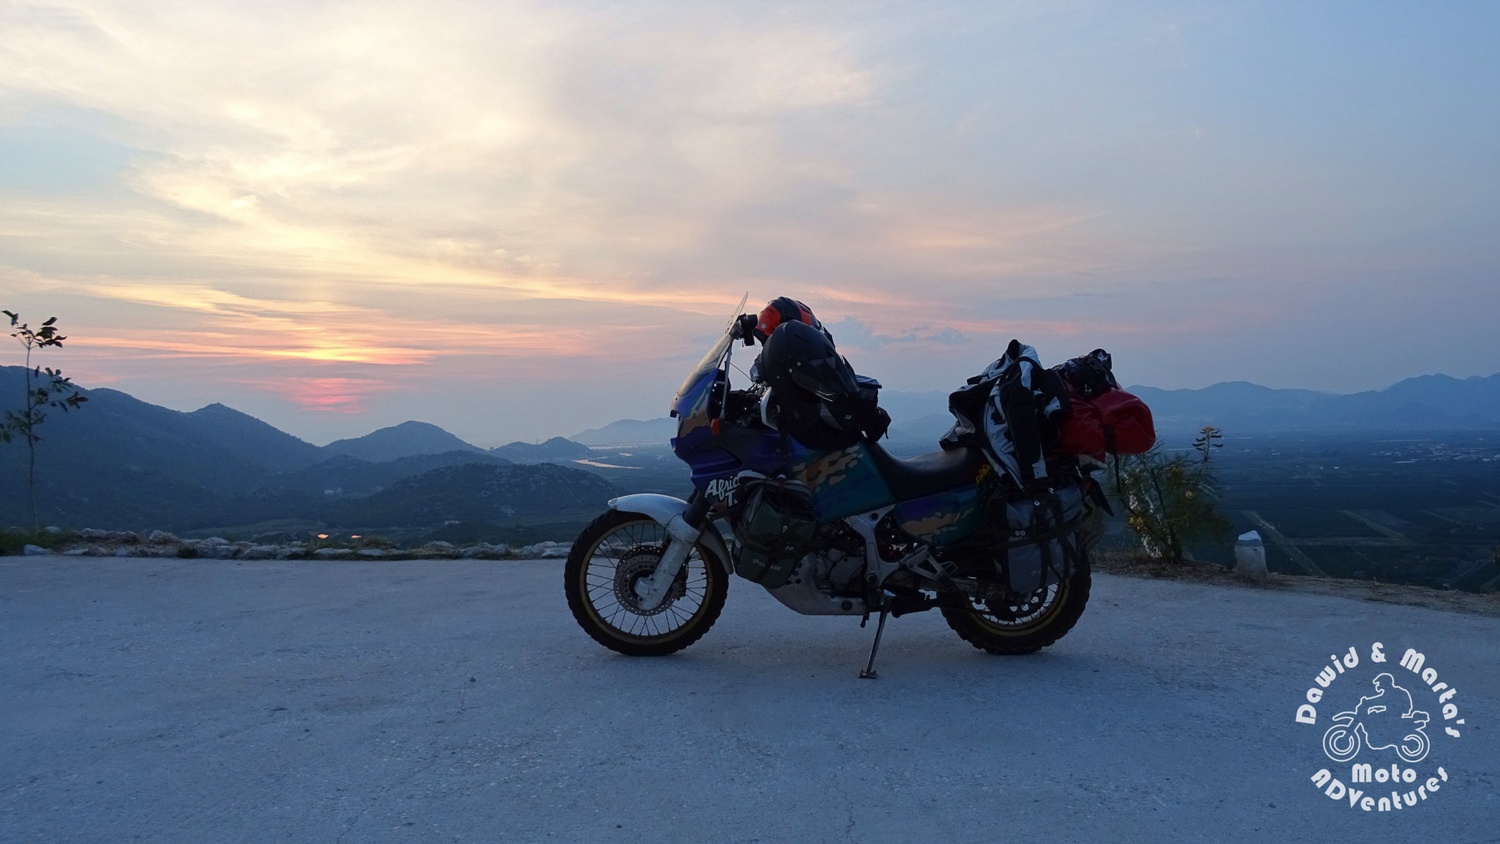 Lookout point at the fruit store in the Neretva River delta with Africa Twin motorbike in the foreground